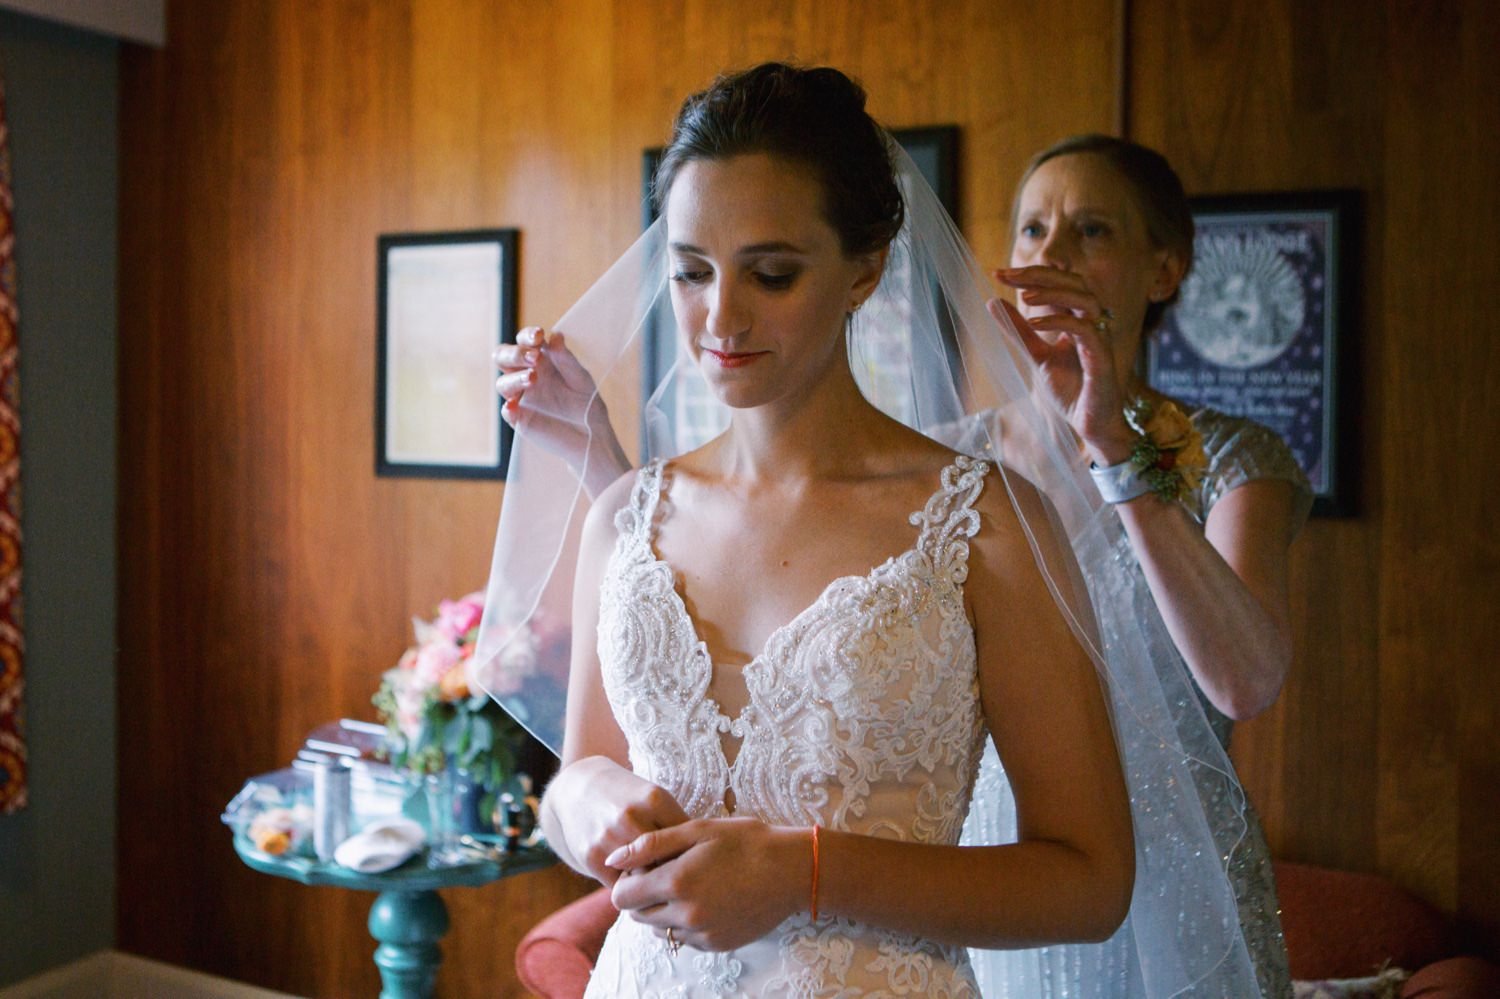  mother of the bride places veil on woman wearing wedding dress 